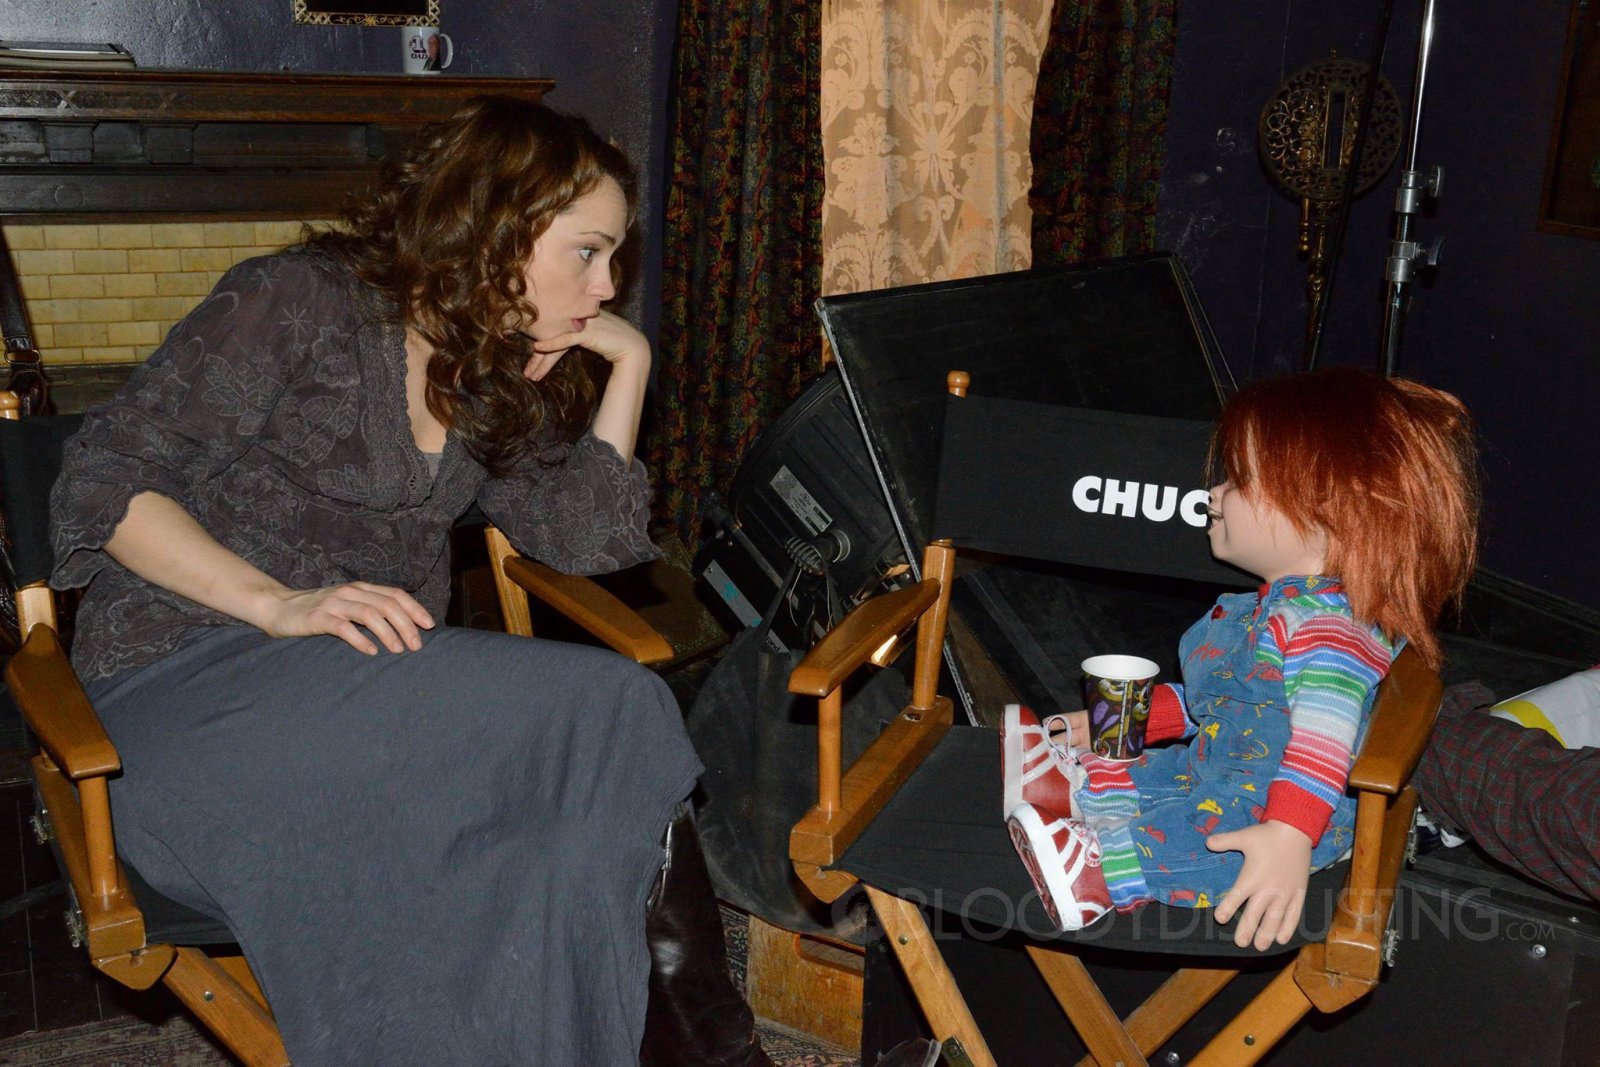 curse-of-chucky-watermarked (1600x1067, 772 kБ)